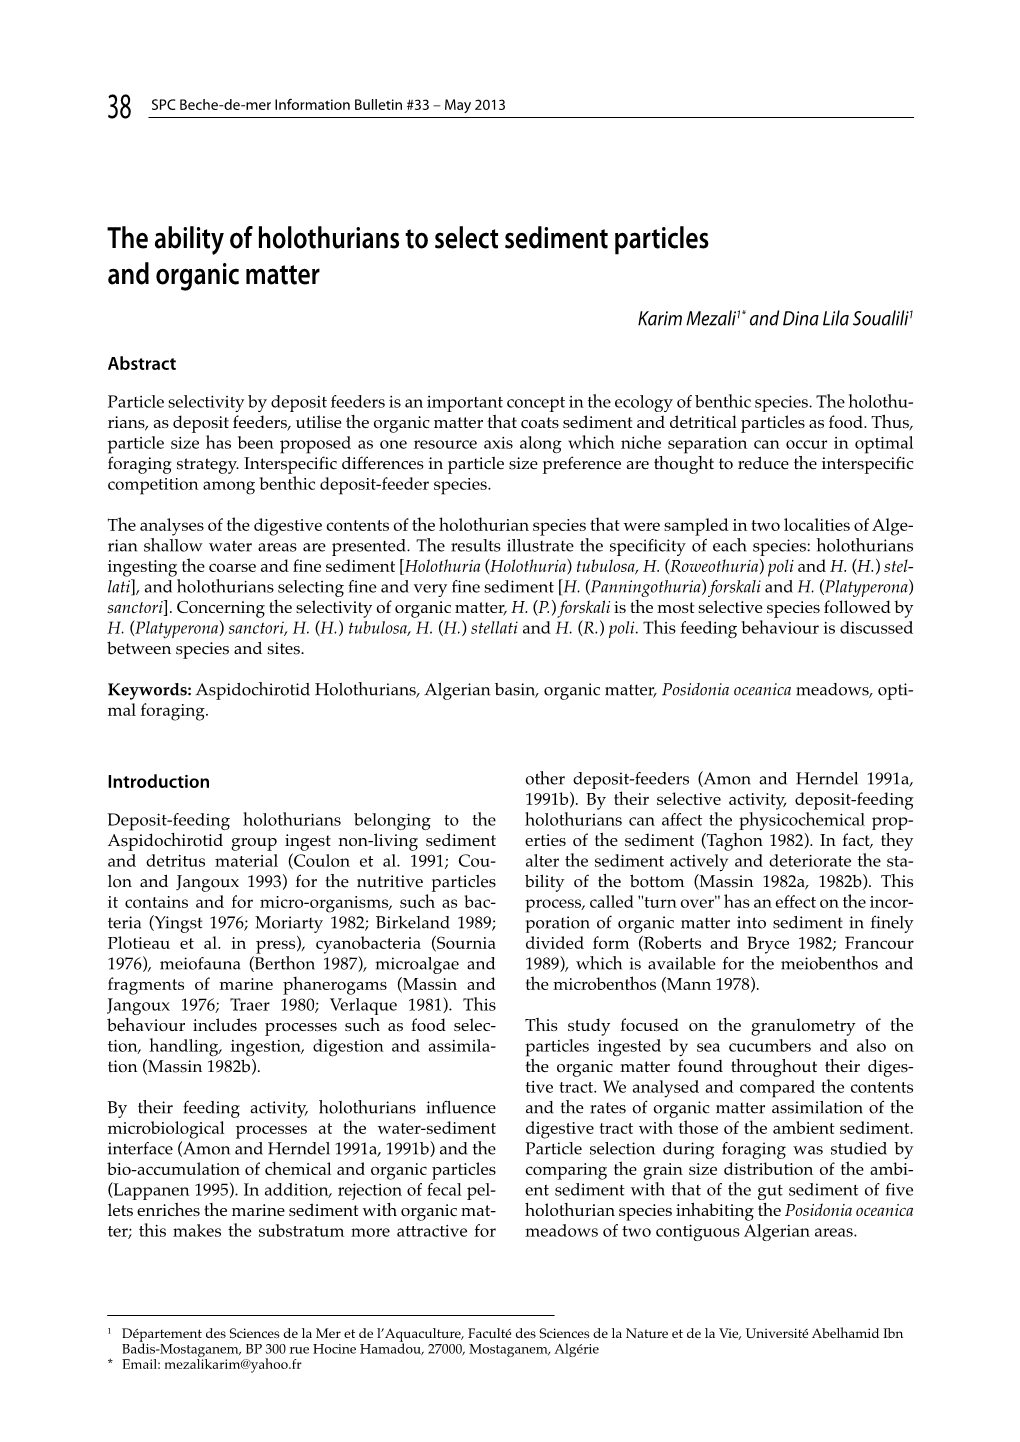 The Ability of Holothurians to Select Sediment Particles and Organic Matter Karim Mezali1* and Dina Lila Soualili1